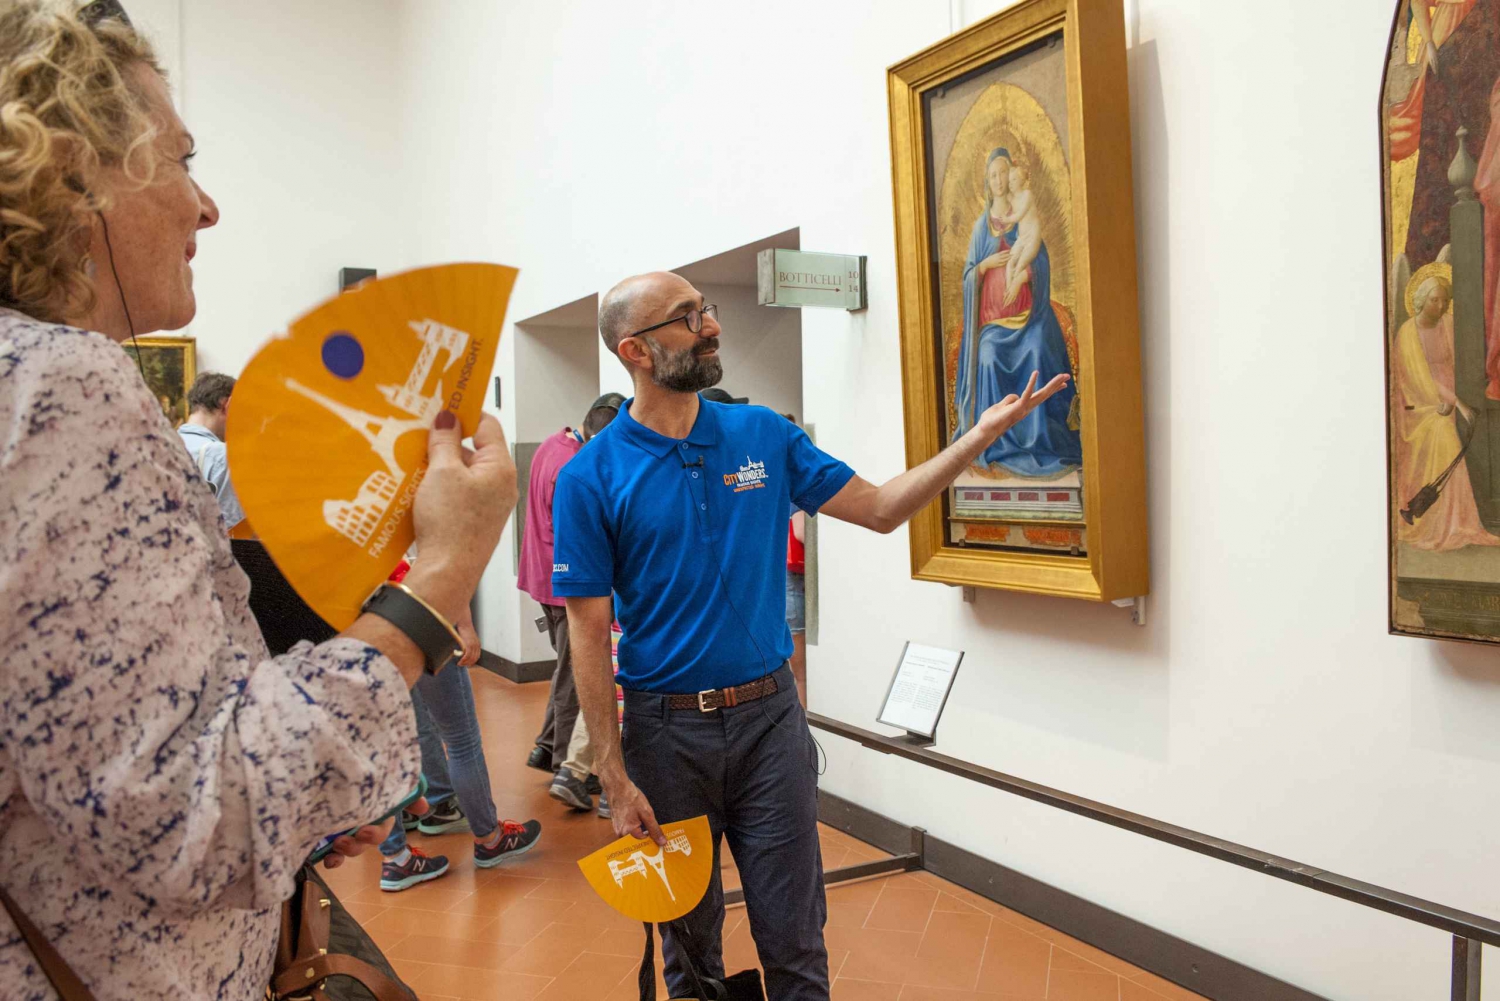 Uffizi Gallery: Small Group Guided Tour with Skip-the-Line